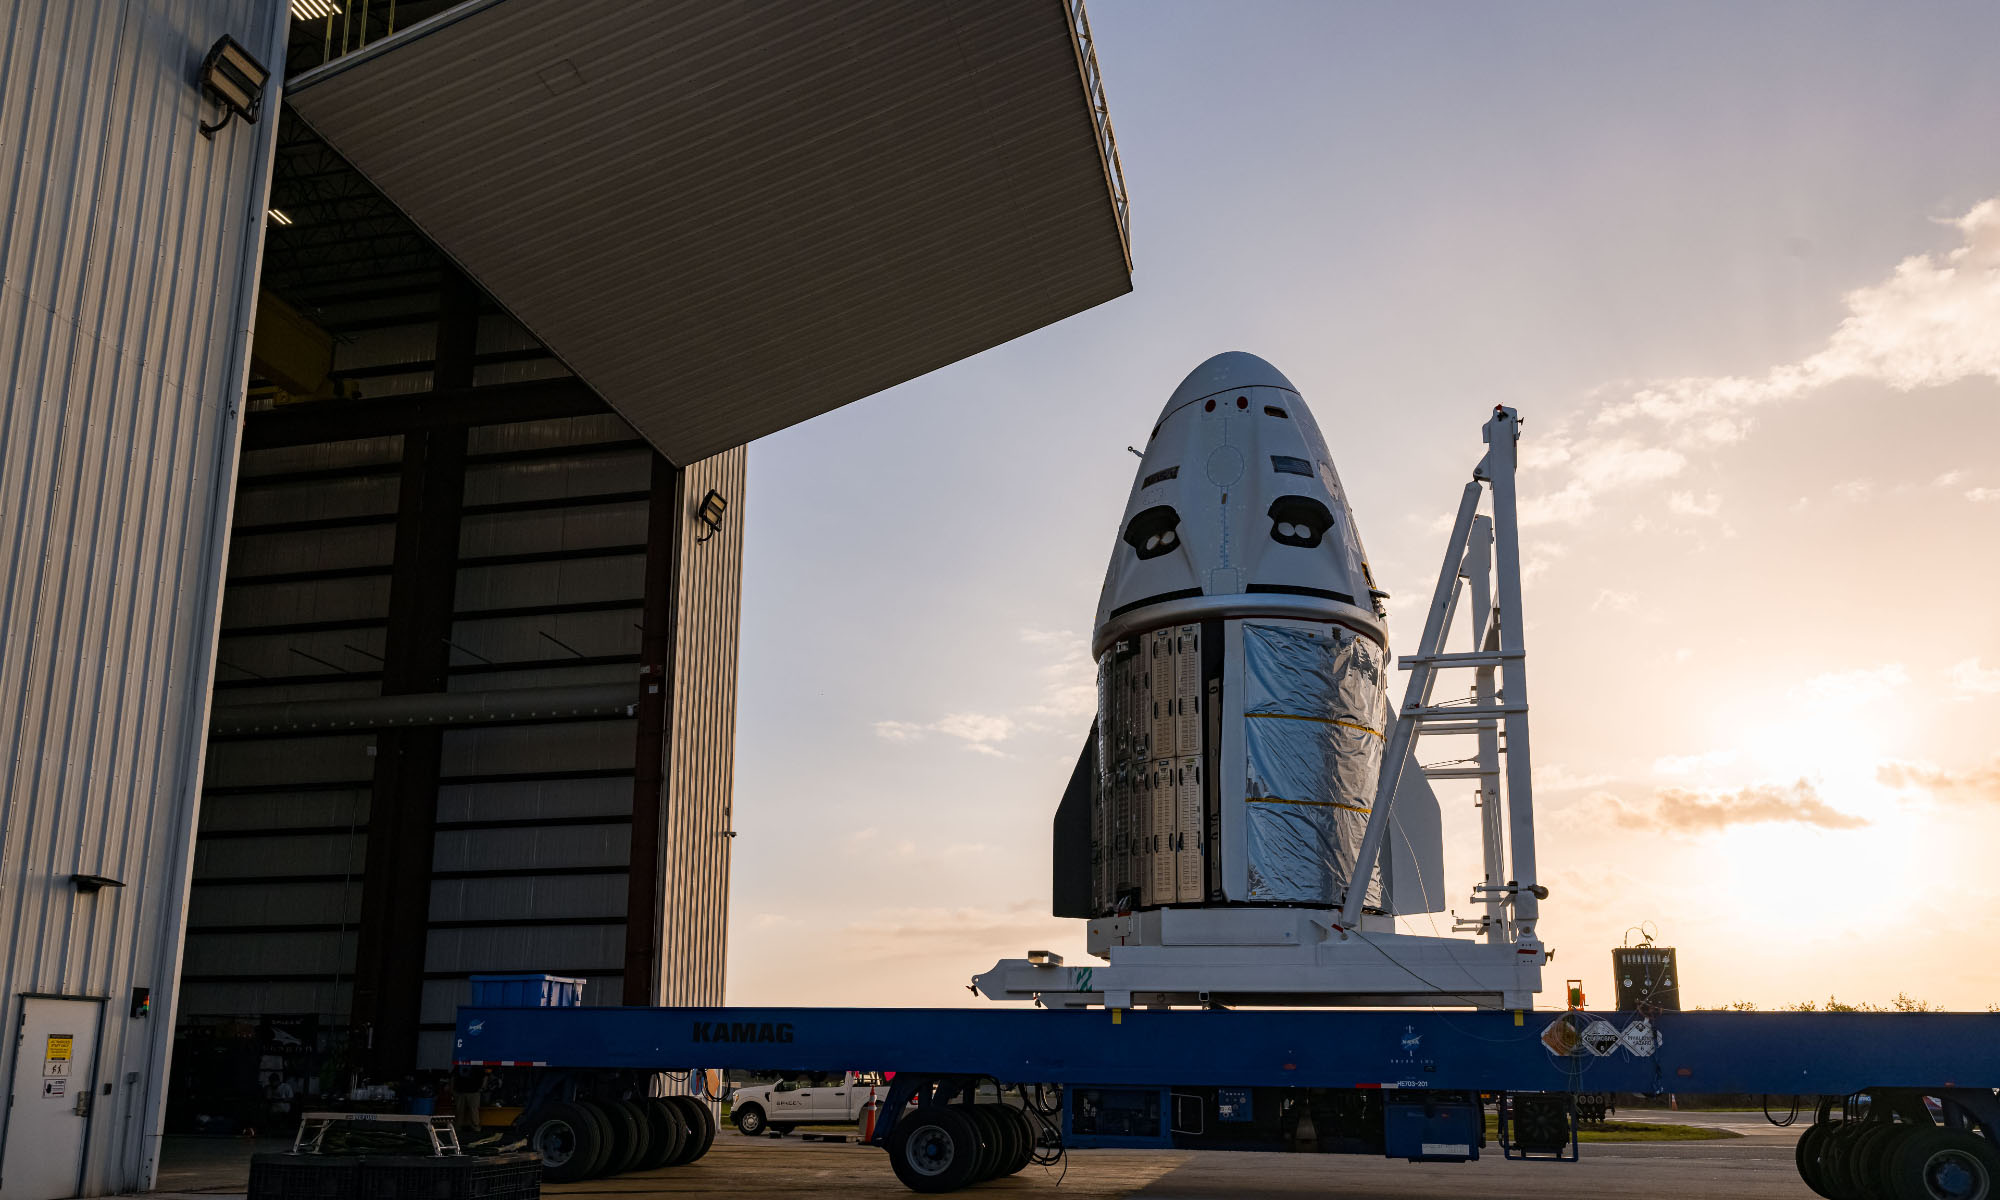 spacex dragon spacecraft prepares for february 27 flight